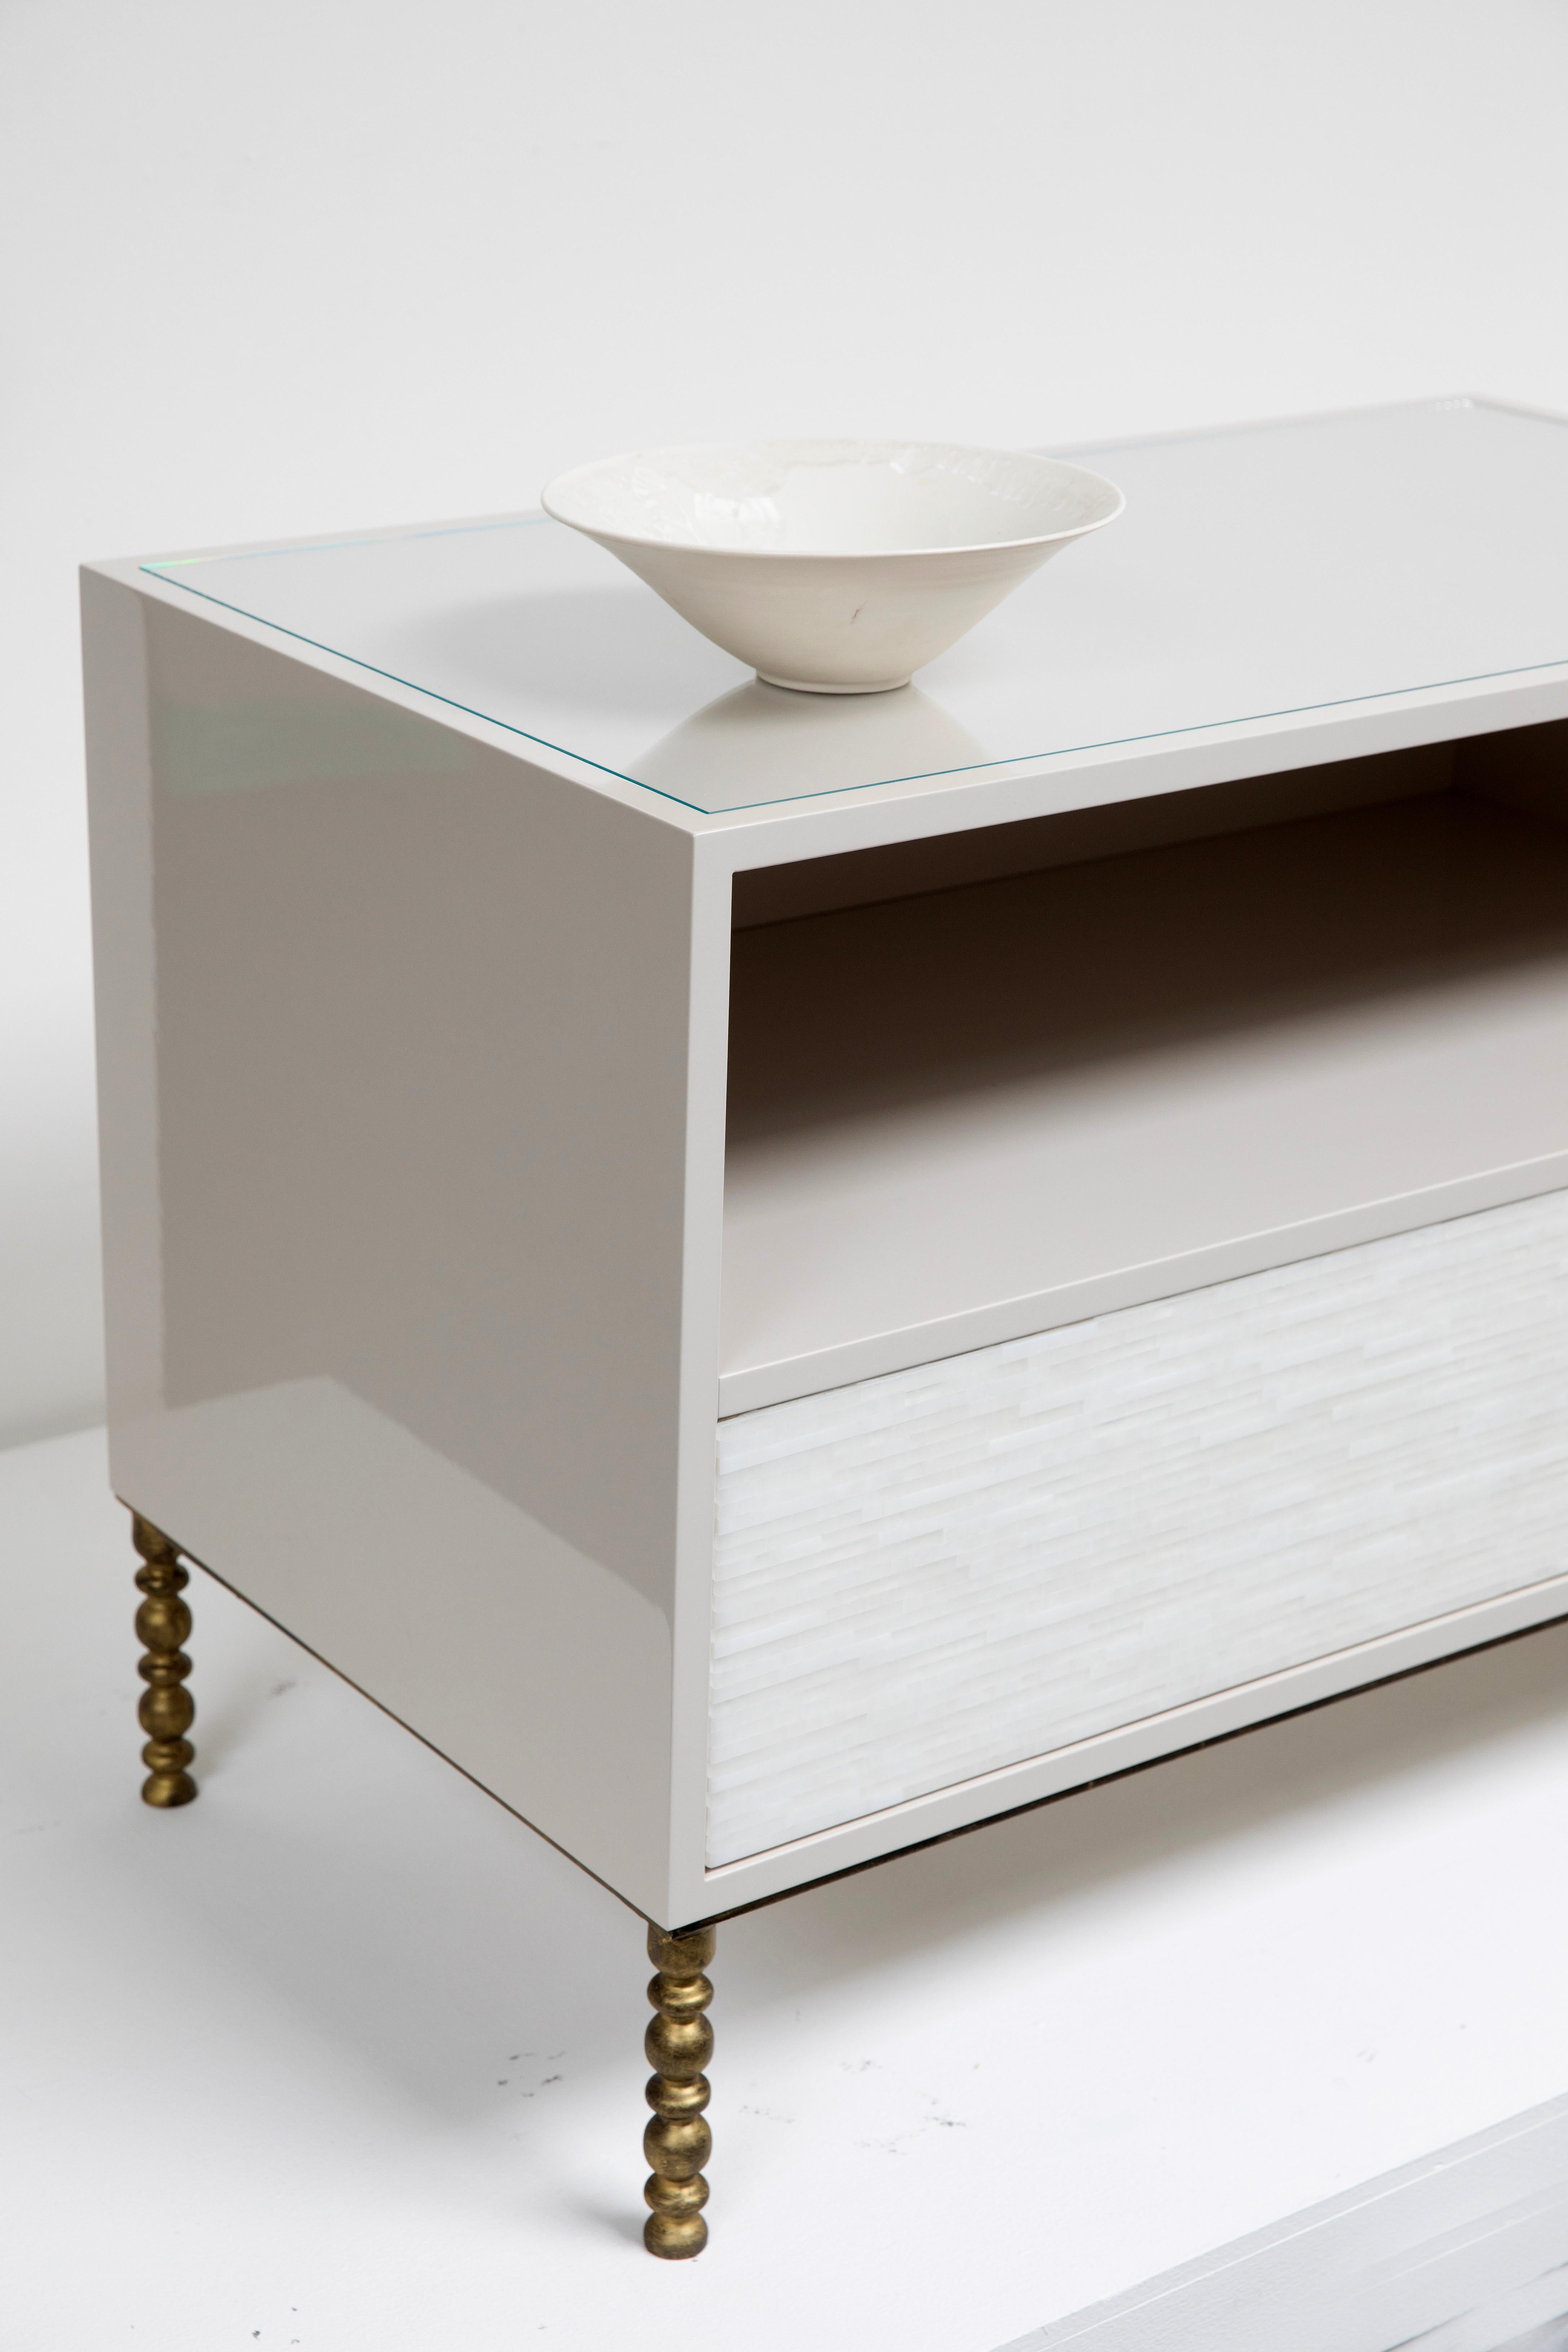 Américain The Modernity One Drawer-One Shelf Glass Nightstands By Ercole  en vente